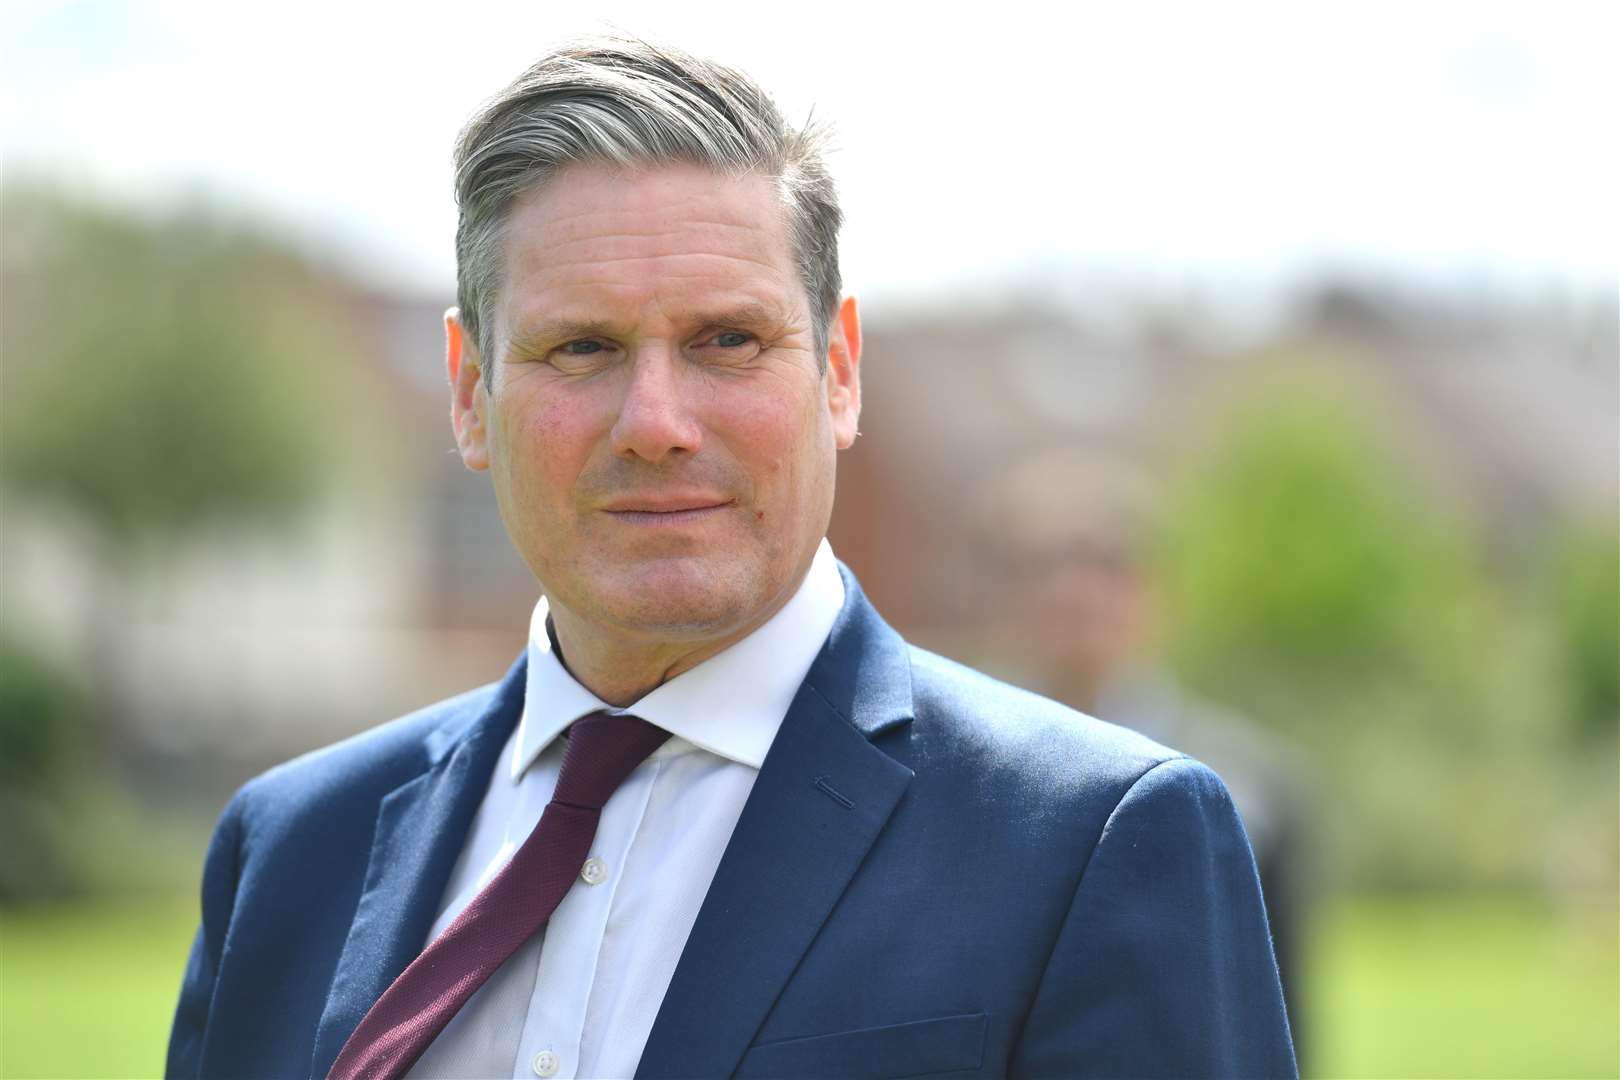 Sir Keir Starmer said he wants to ‘draw a line’ under anti-Semitism in the Labour Party (Jacob King/PA)